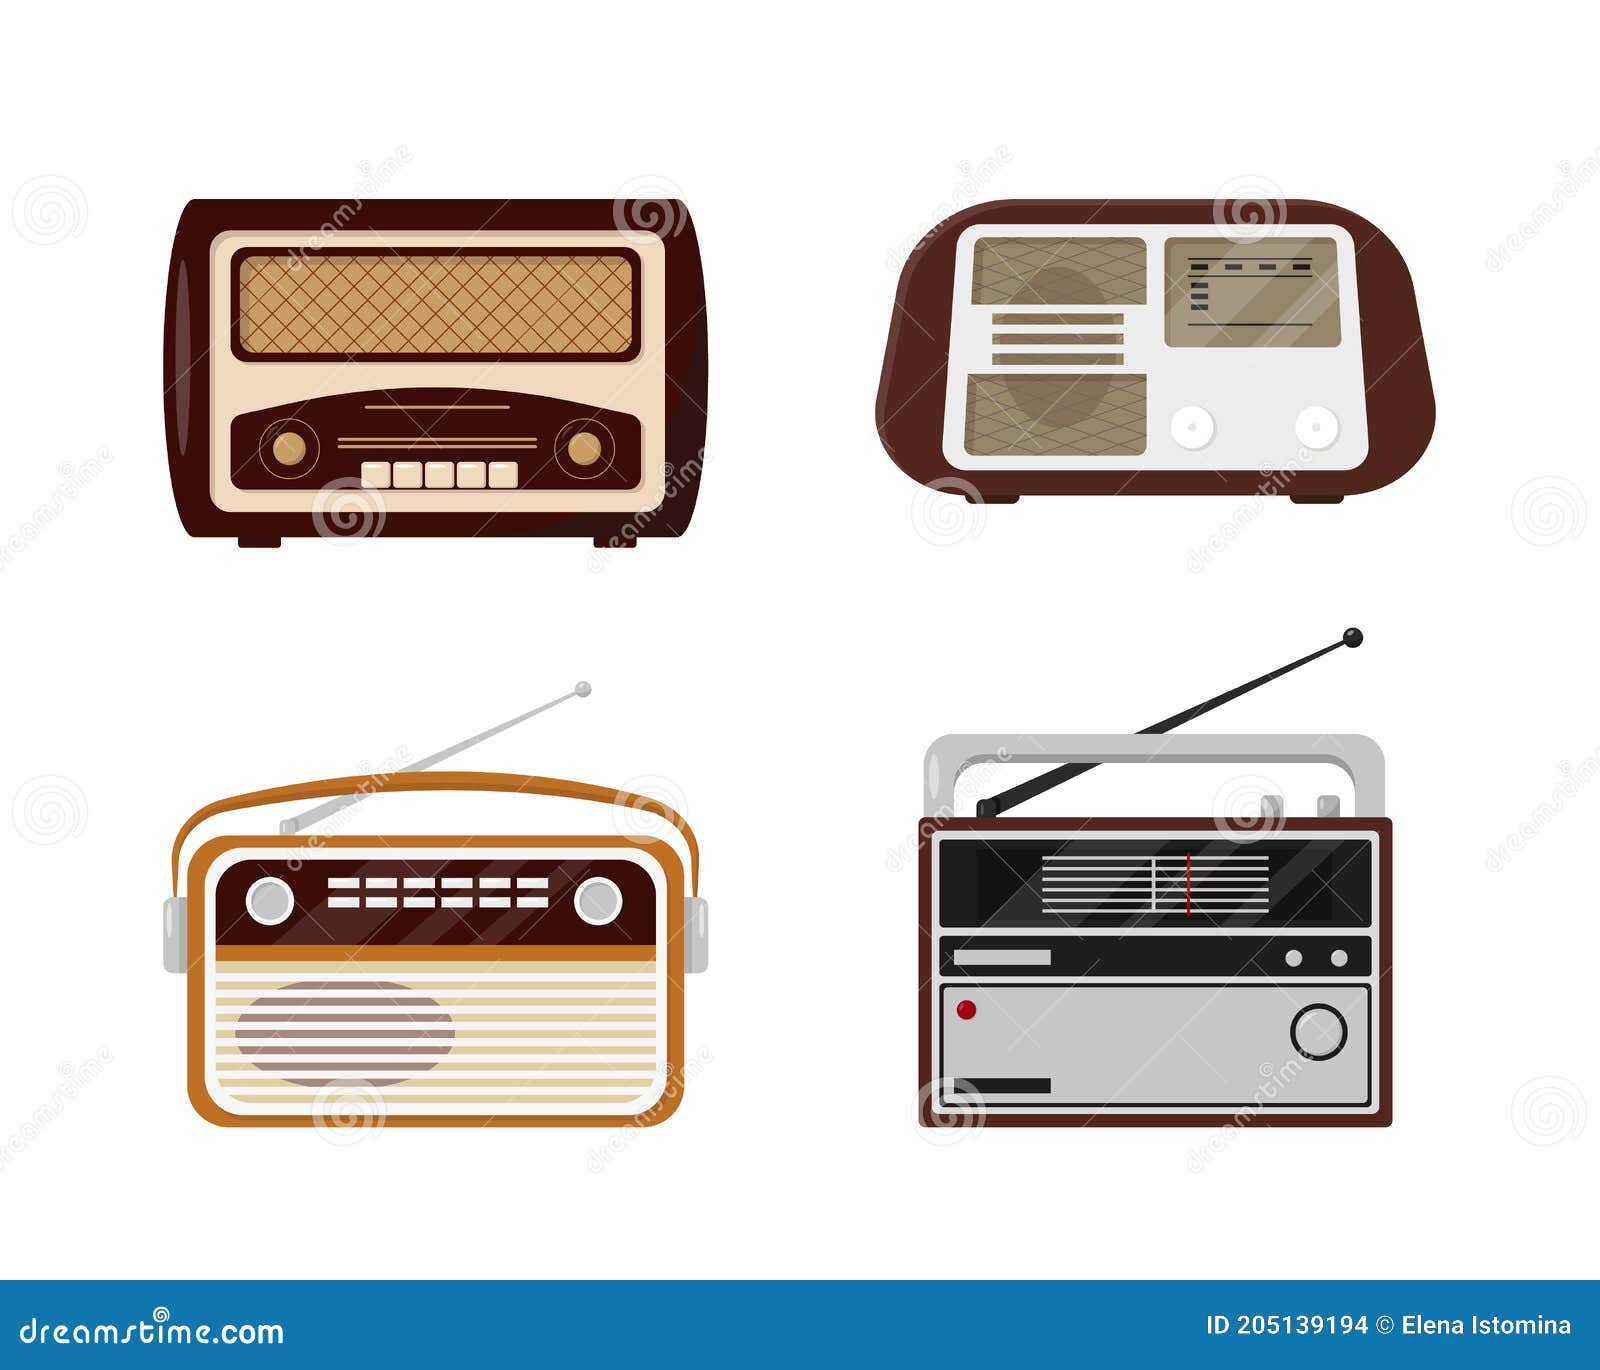 https://thumbs.dreamstime.com/z/set-retro-radios-vintage-radio-collection-set-retro-radios-vintage-radio-collection-isolated-white-background-old-models-205139194.jpg